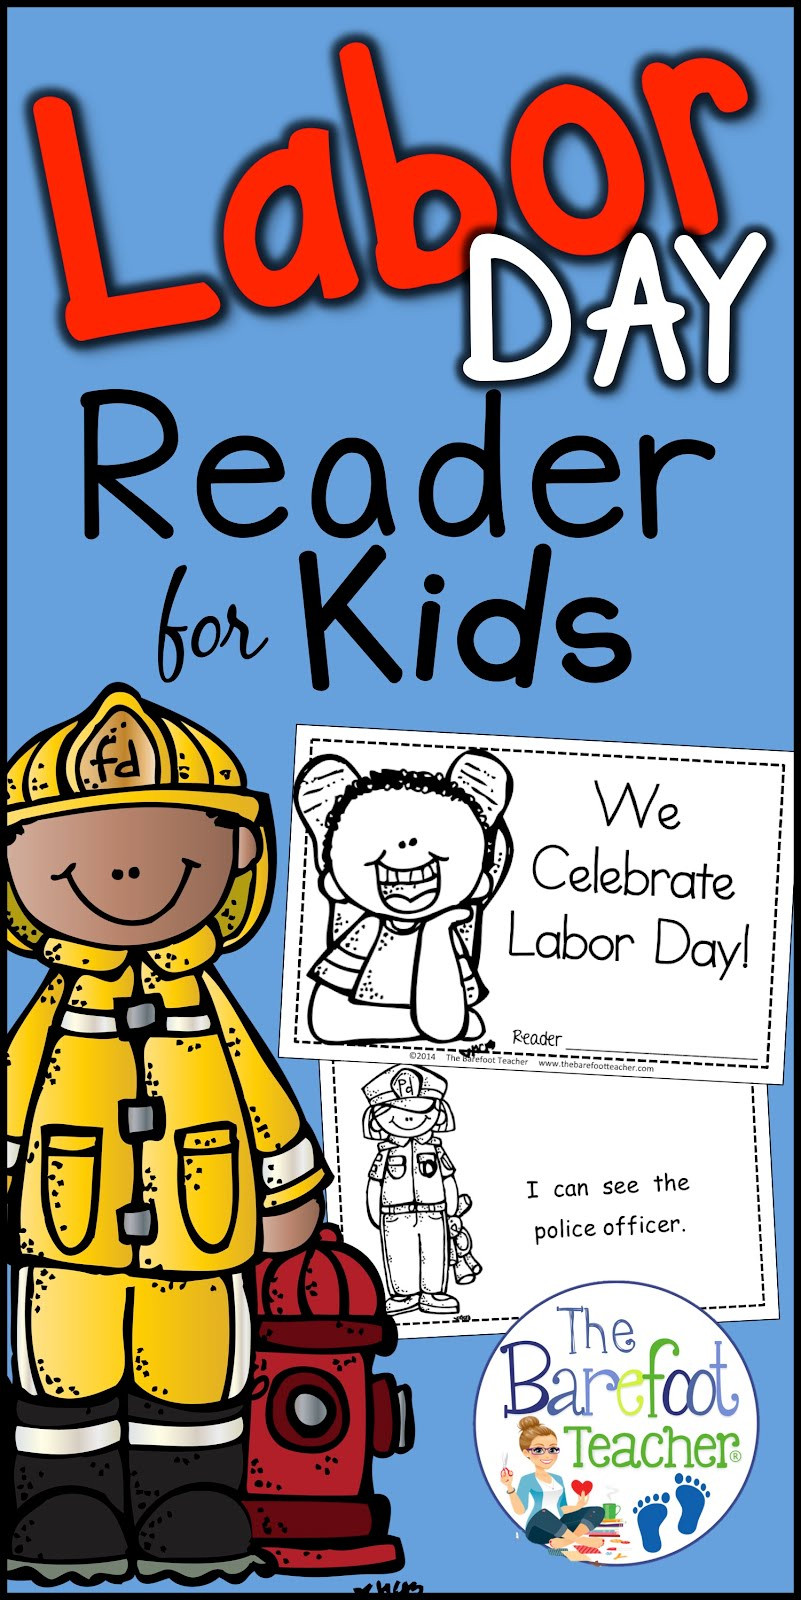 Labor Day Activities For Kindergarten
 The Barefoot Teacher Labor Day Emergent Reader I Can See